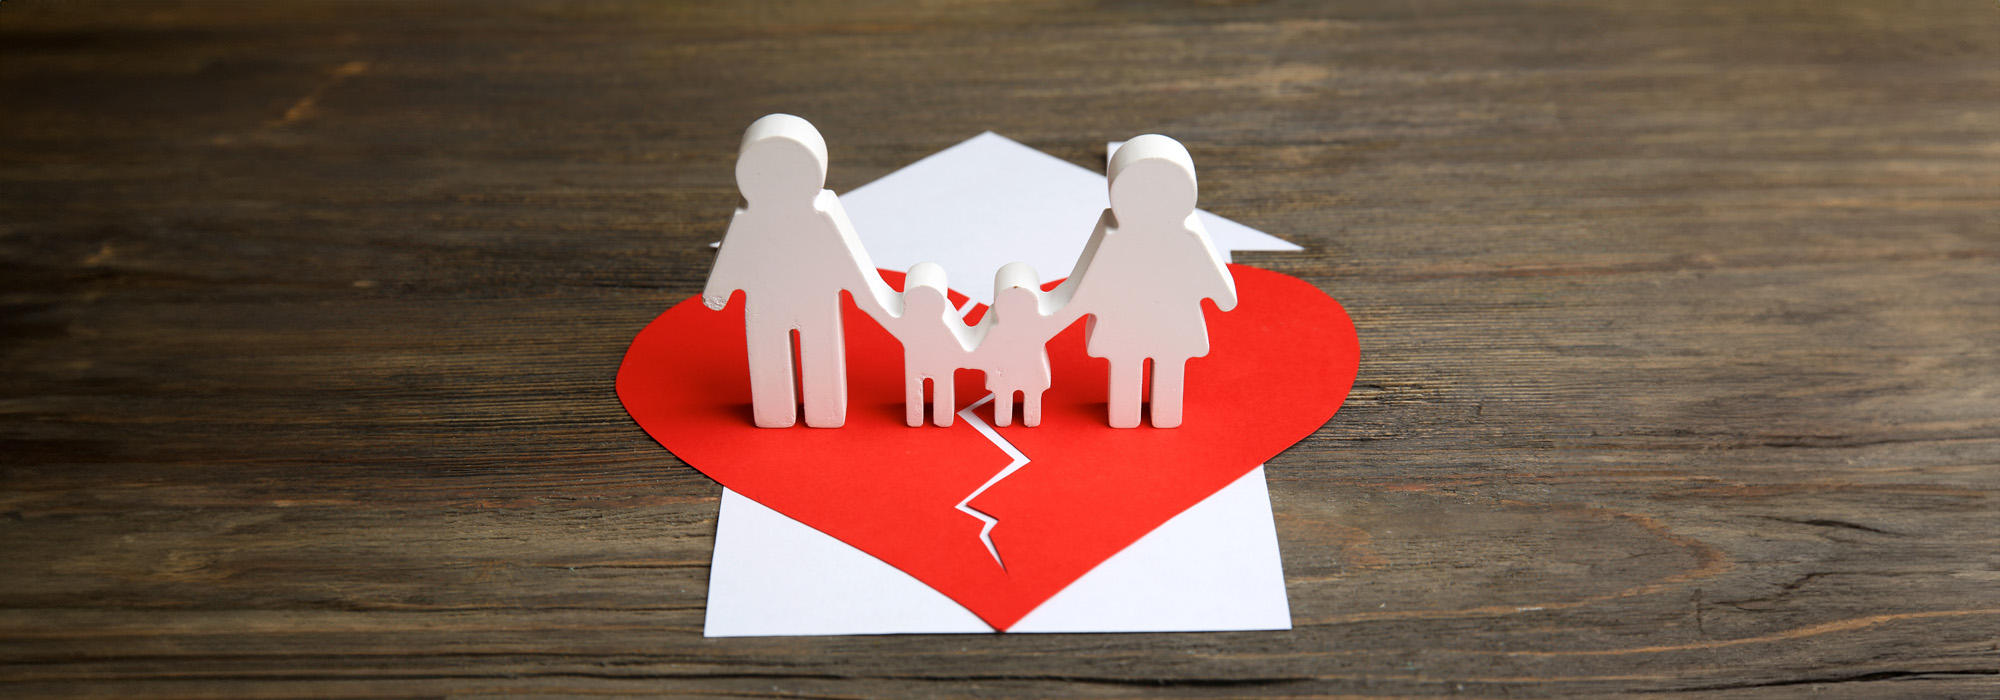 cutout silhouette of a family split apart on a paper heart